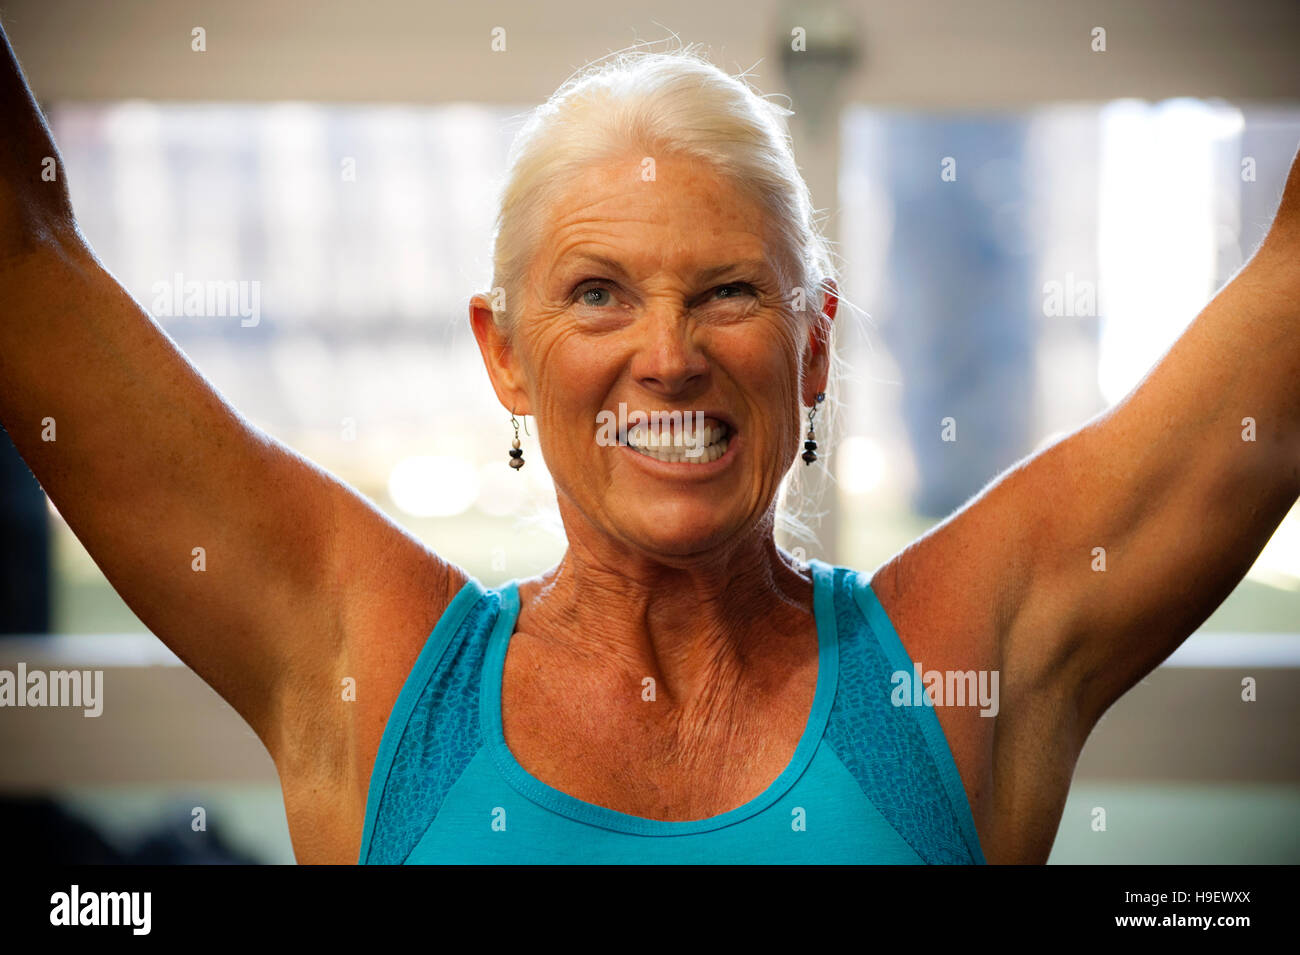 22,000+ Strong Old Lady Stock Photos, Pictures & Royalty-Free